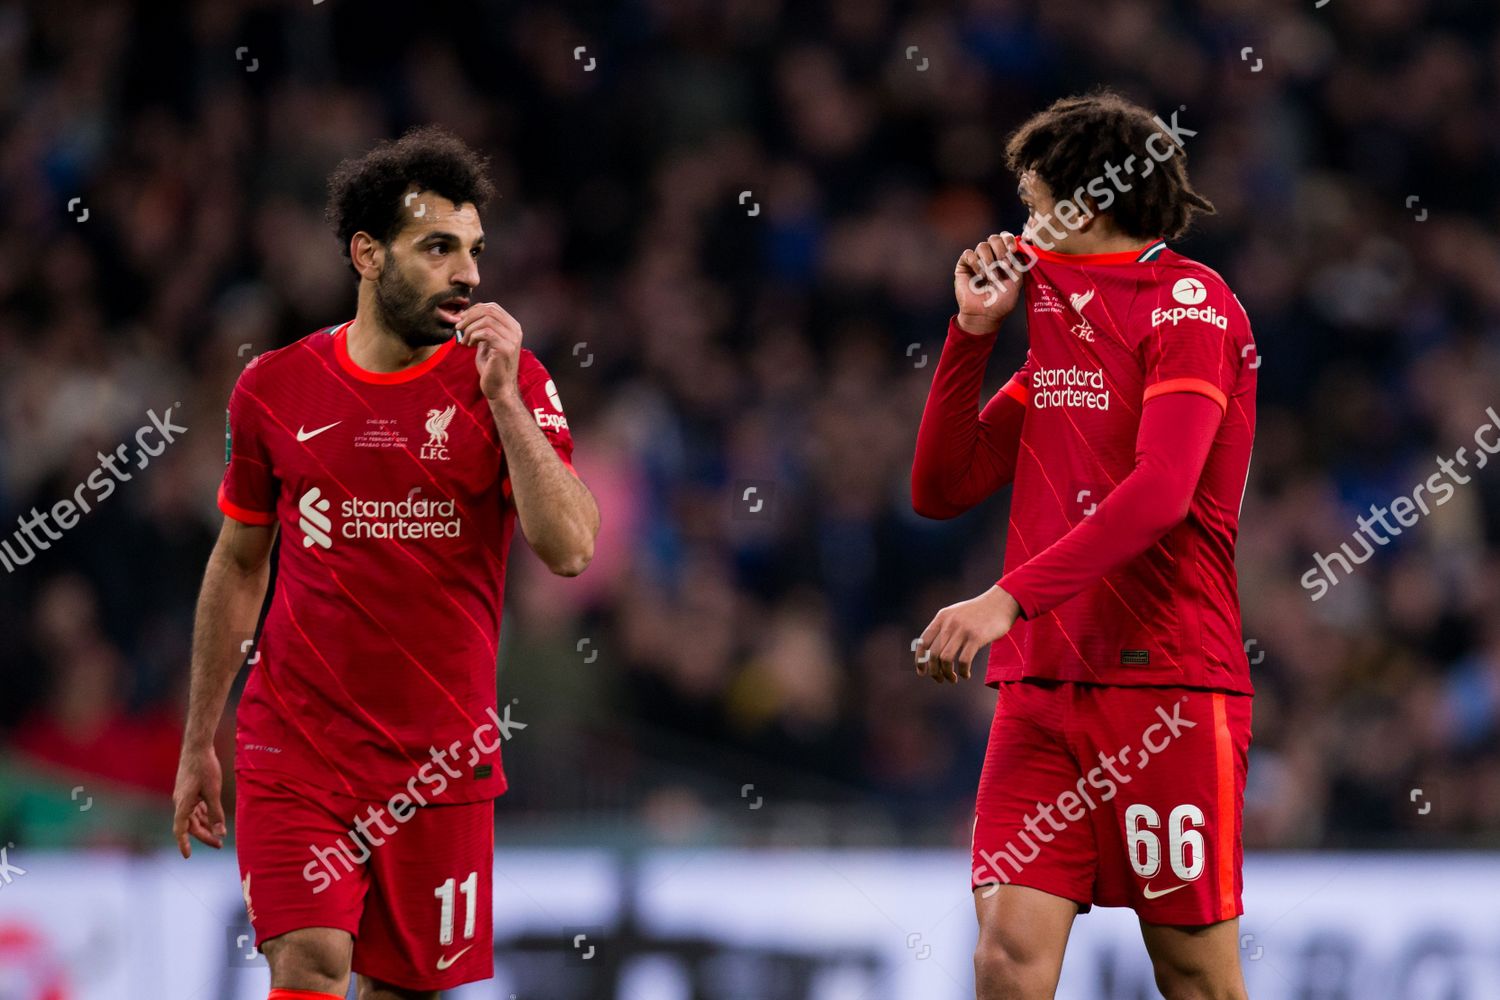  Mohamed Salah and Virgil van Dijk of Liverpool in action during a match against Chelsea, with other players including Trent Alexander-Arnold, Paolo Dybala, Joshua Kimmich, Kevin De Bruyne, Jonathan David, Conor Gallagher, Alphonso Davies, Neymar, Lionel Messi, Weston McKennie, Ferland Mendy, and Lutsharel Geertruida.